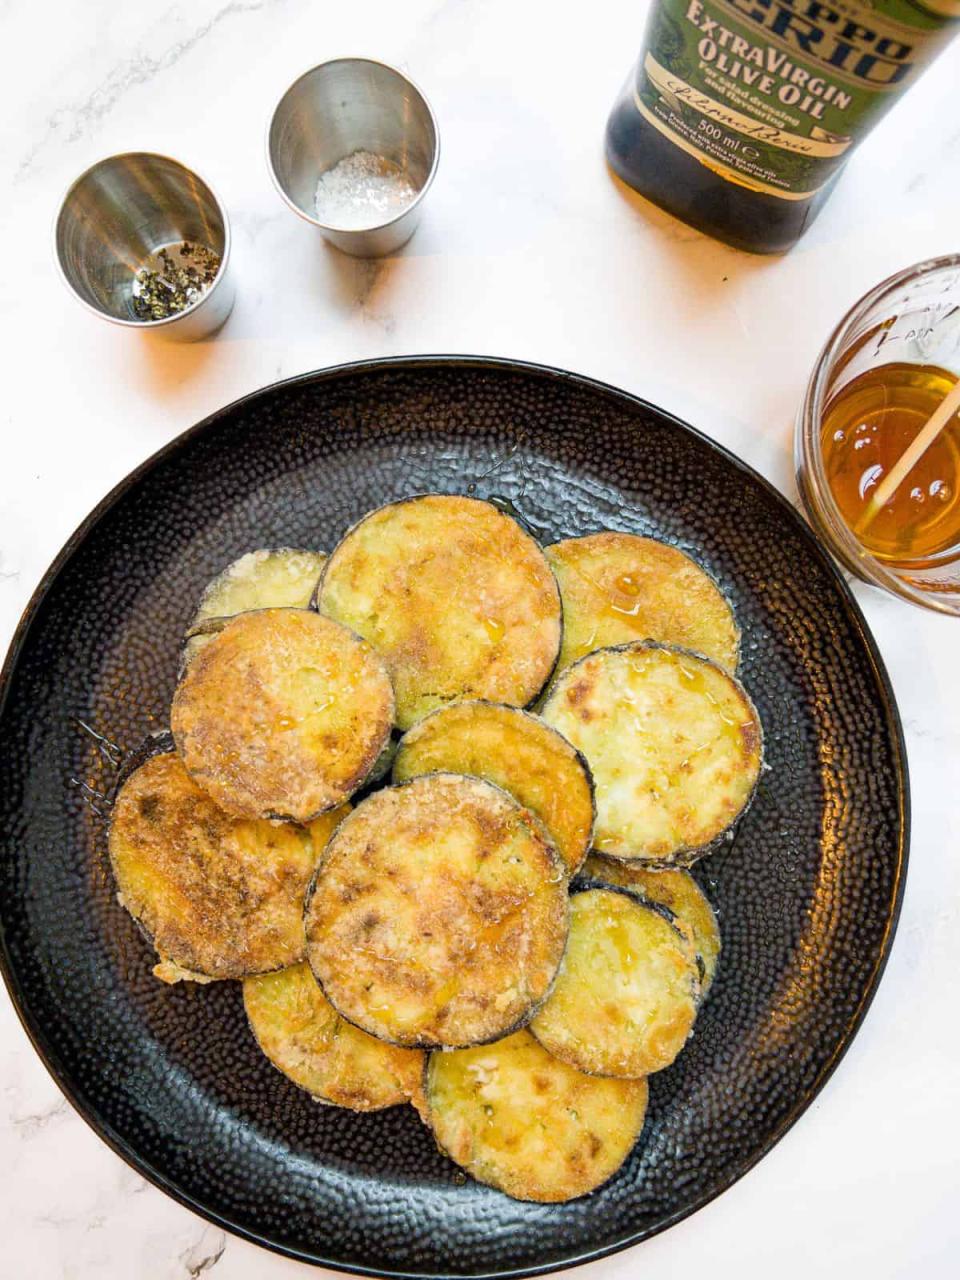 Fried Aubergine With Honey (Berenjenas Fritas Con Miel) - The Scatty Mum